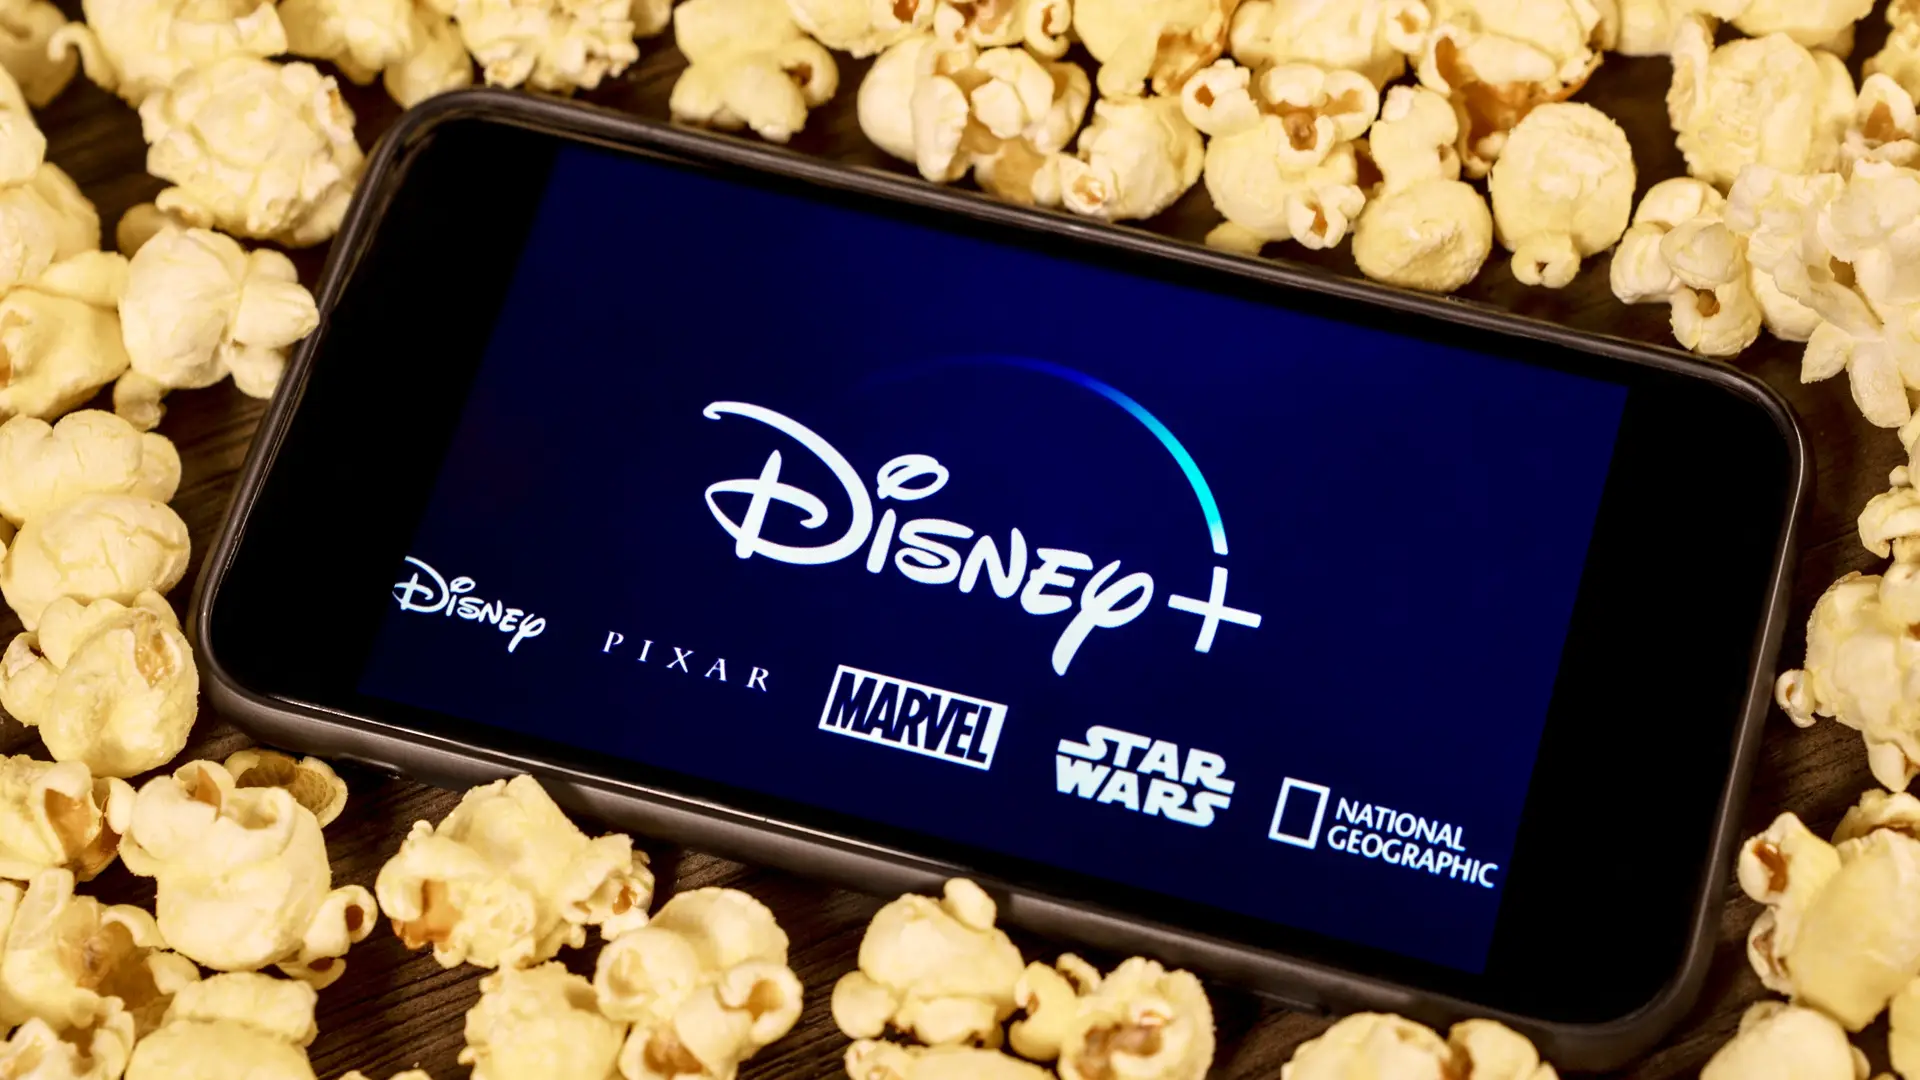 Disney plus logo on a smartphone with popcorn that you can enjoy with the provider sky